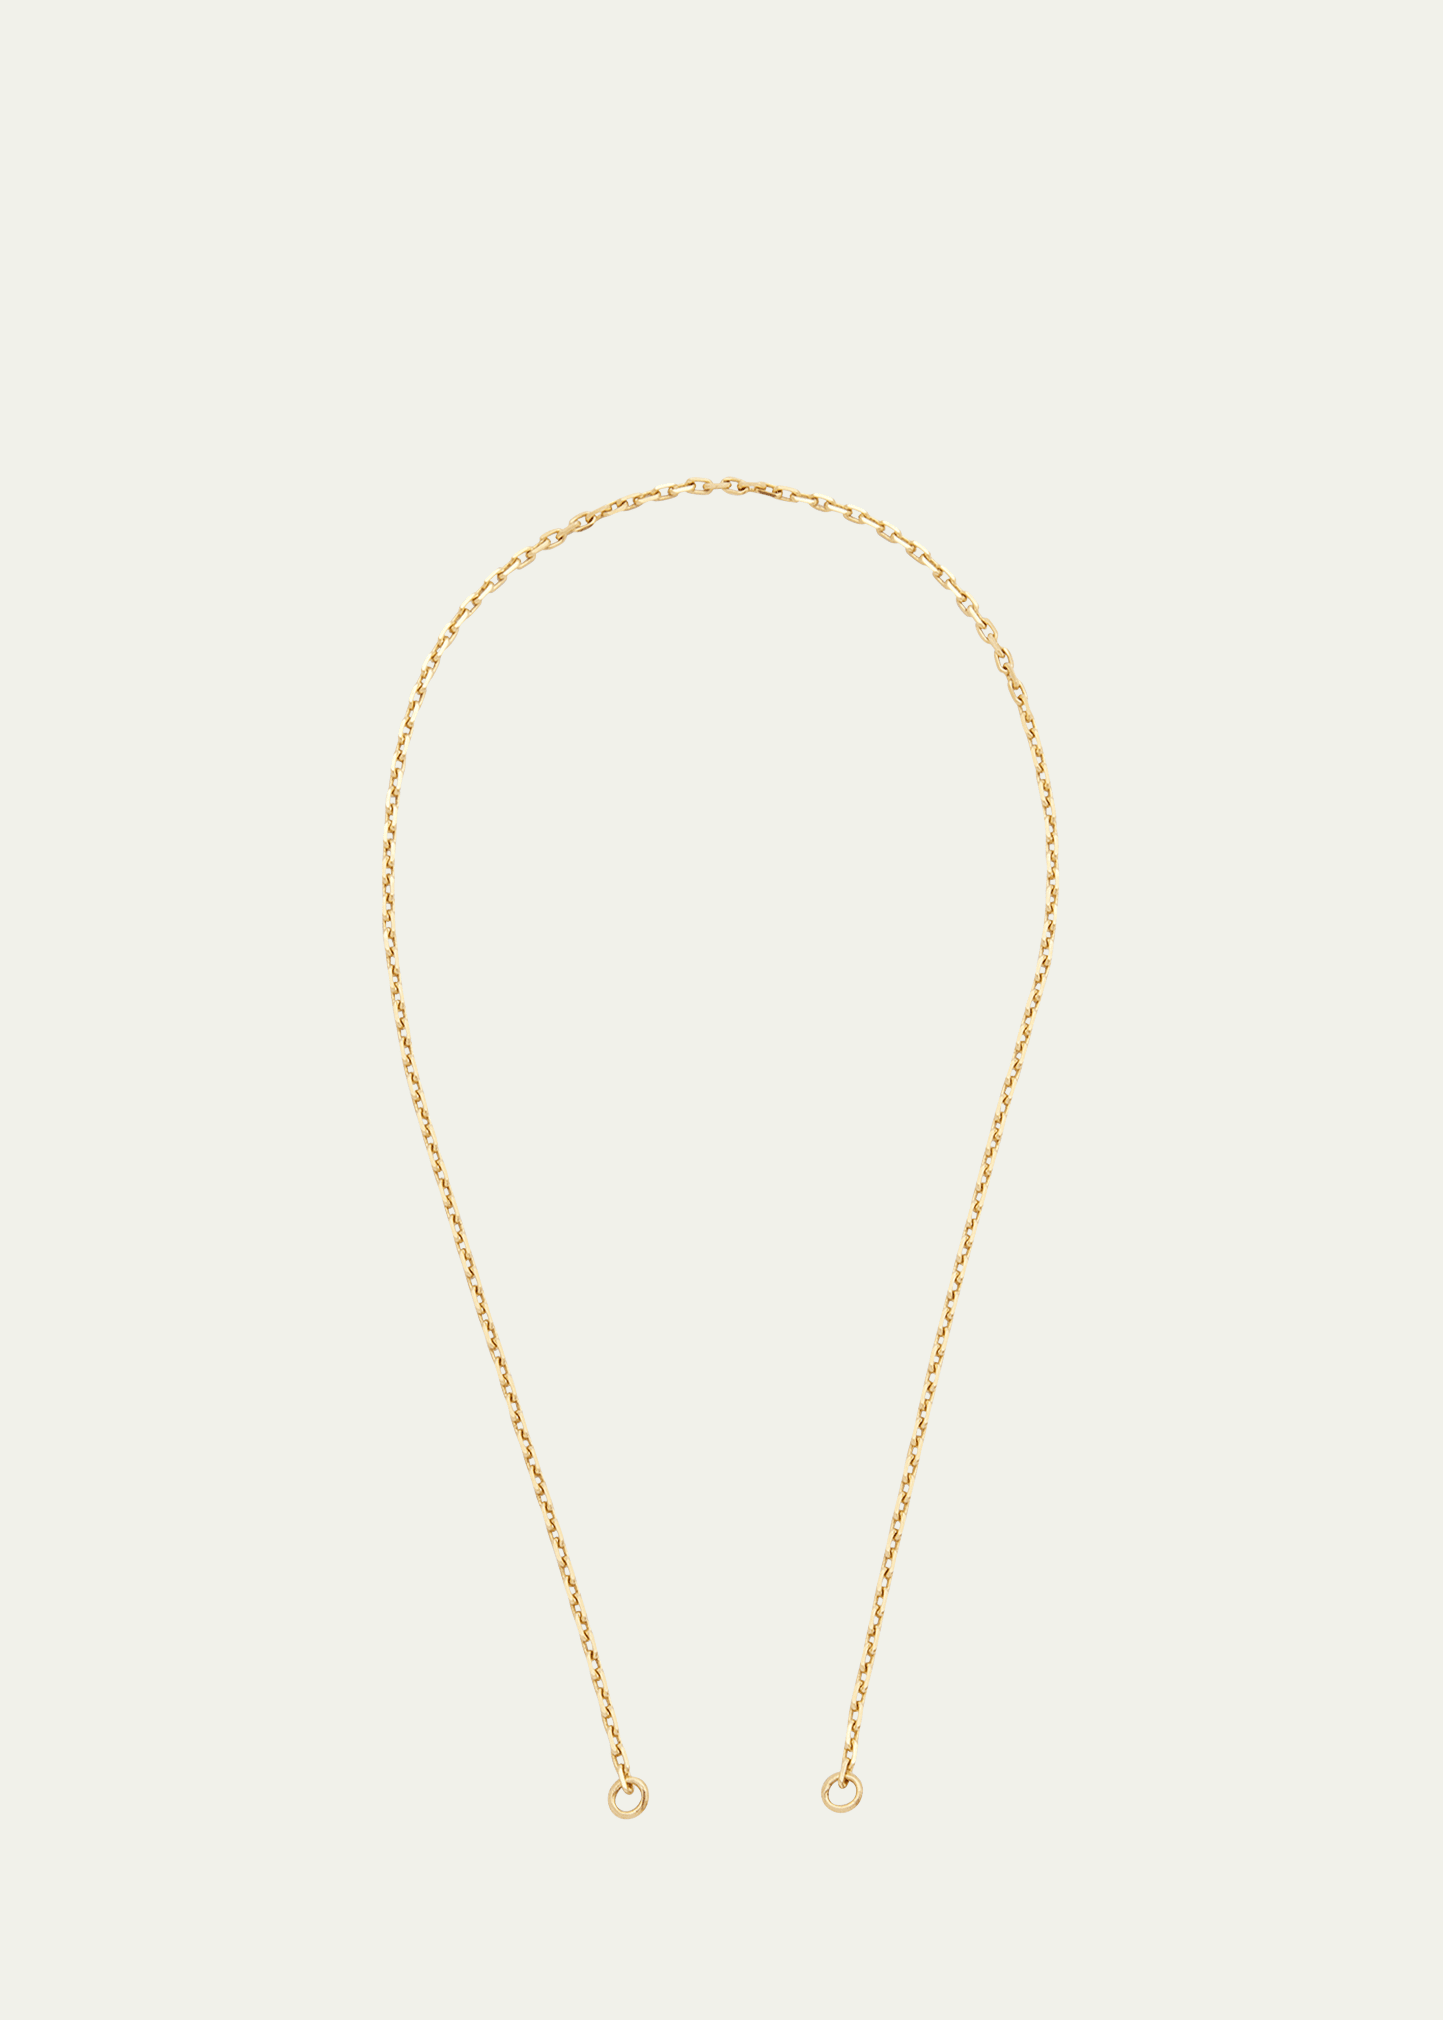 18k Yellow Gold Anchor Chain, 16"L